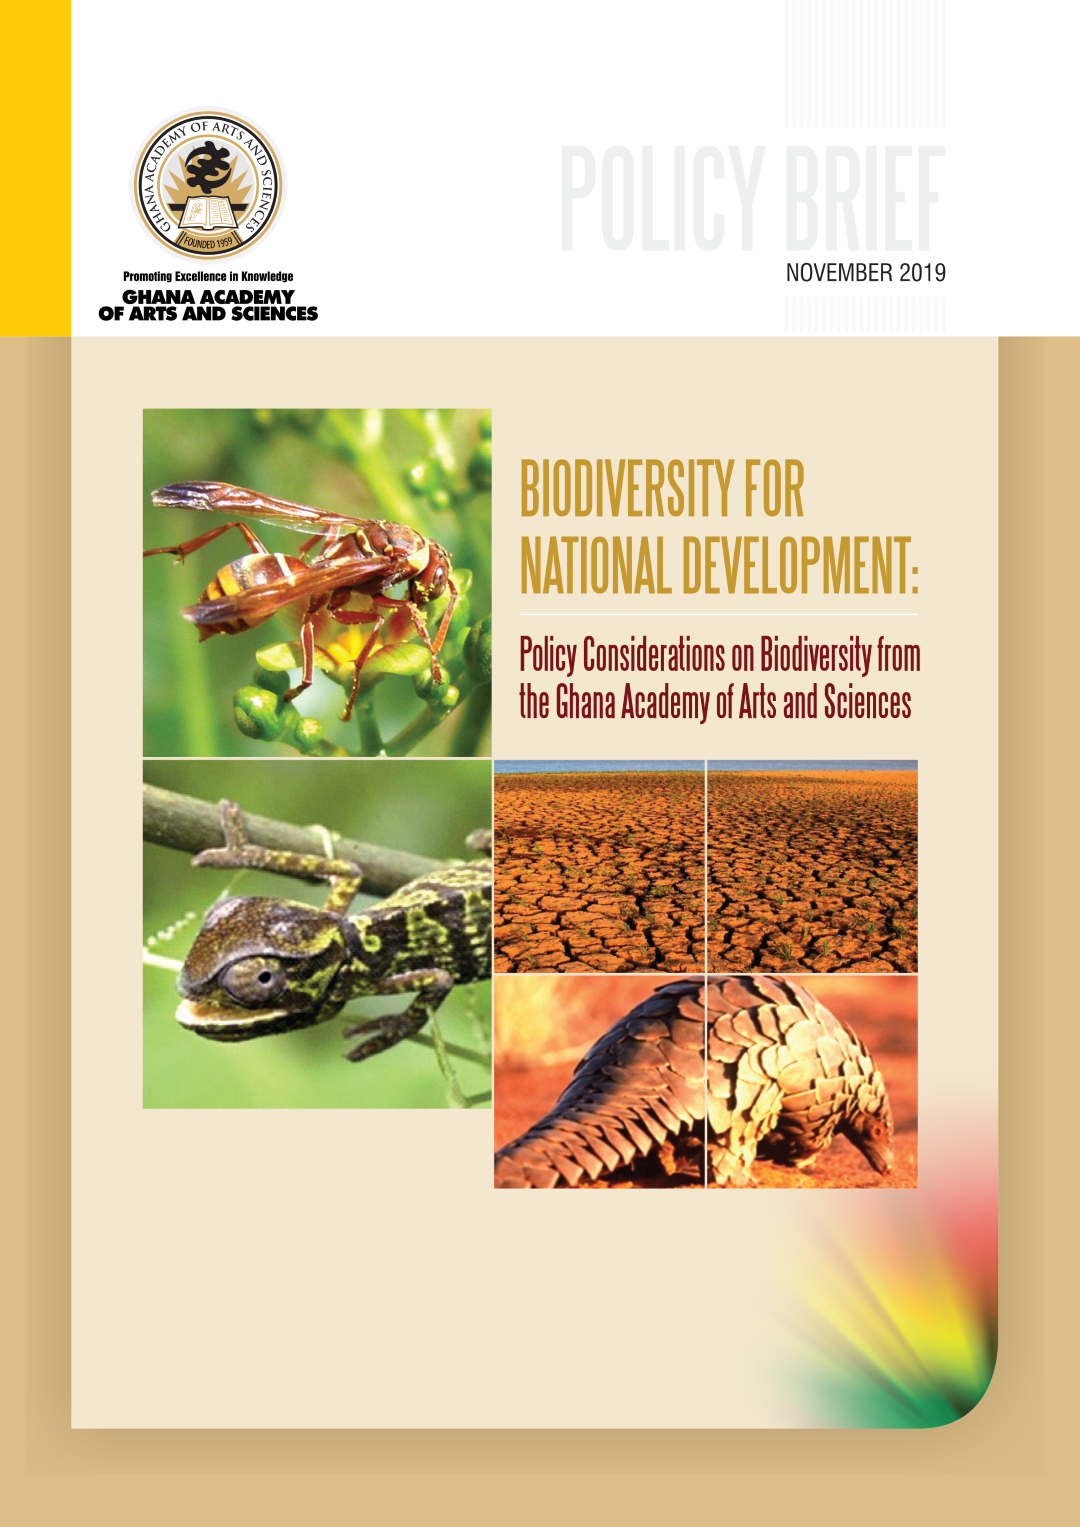 GAAS Policy Brief_Biodiversity For National Development_2019_Final-1